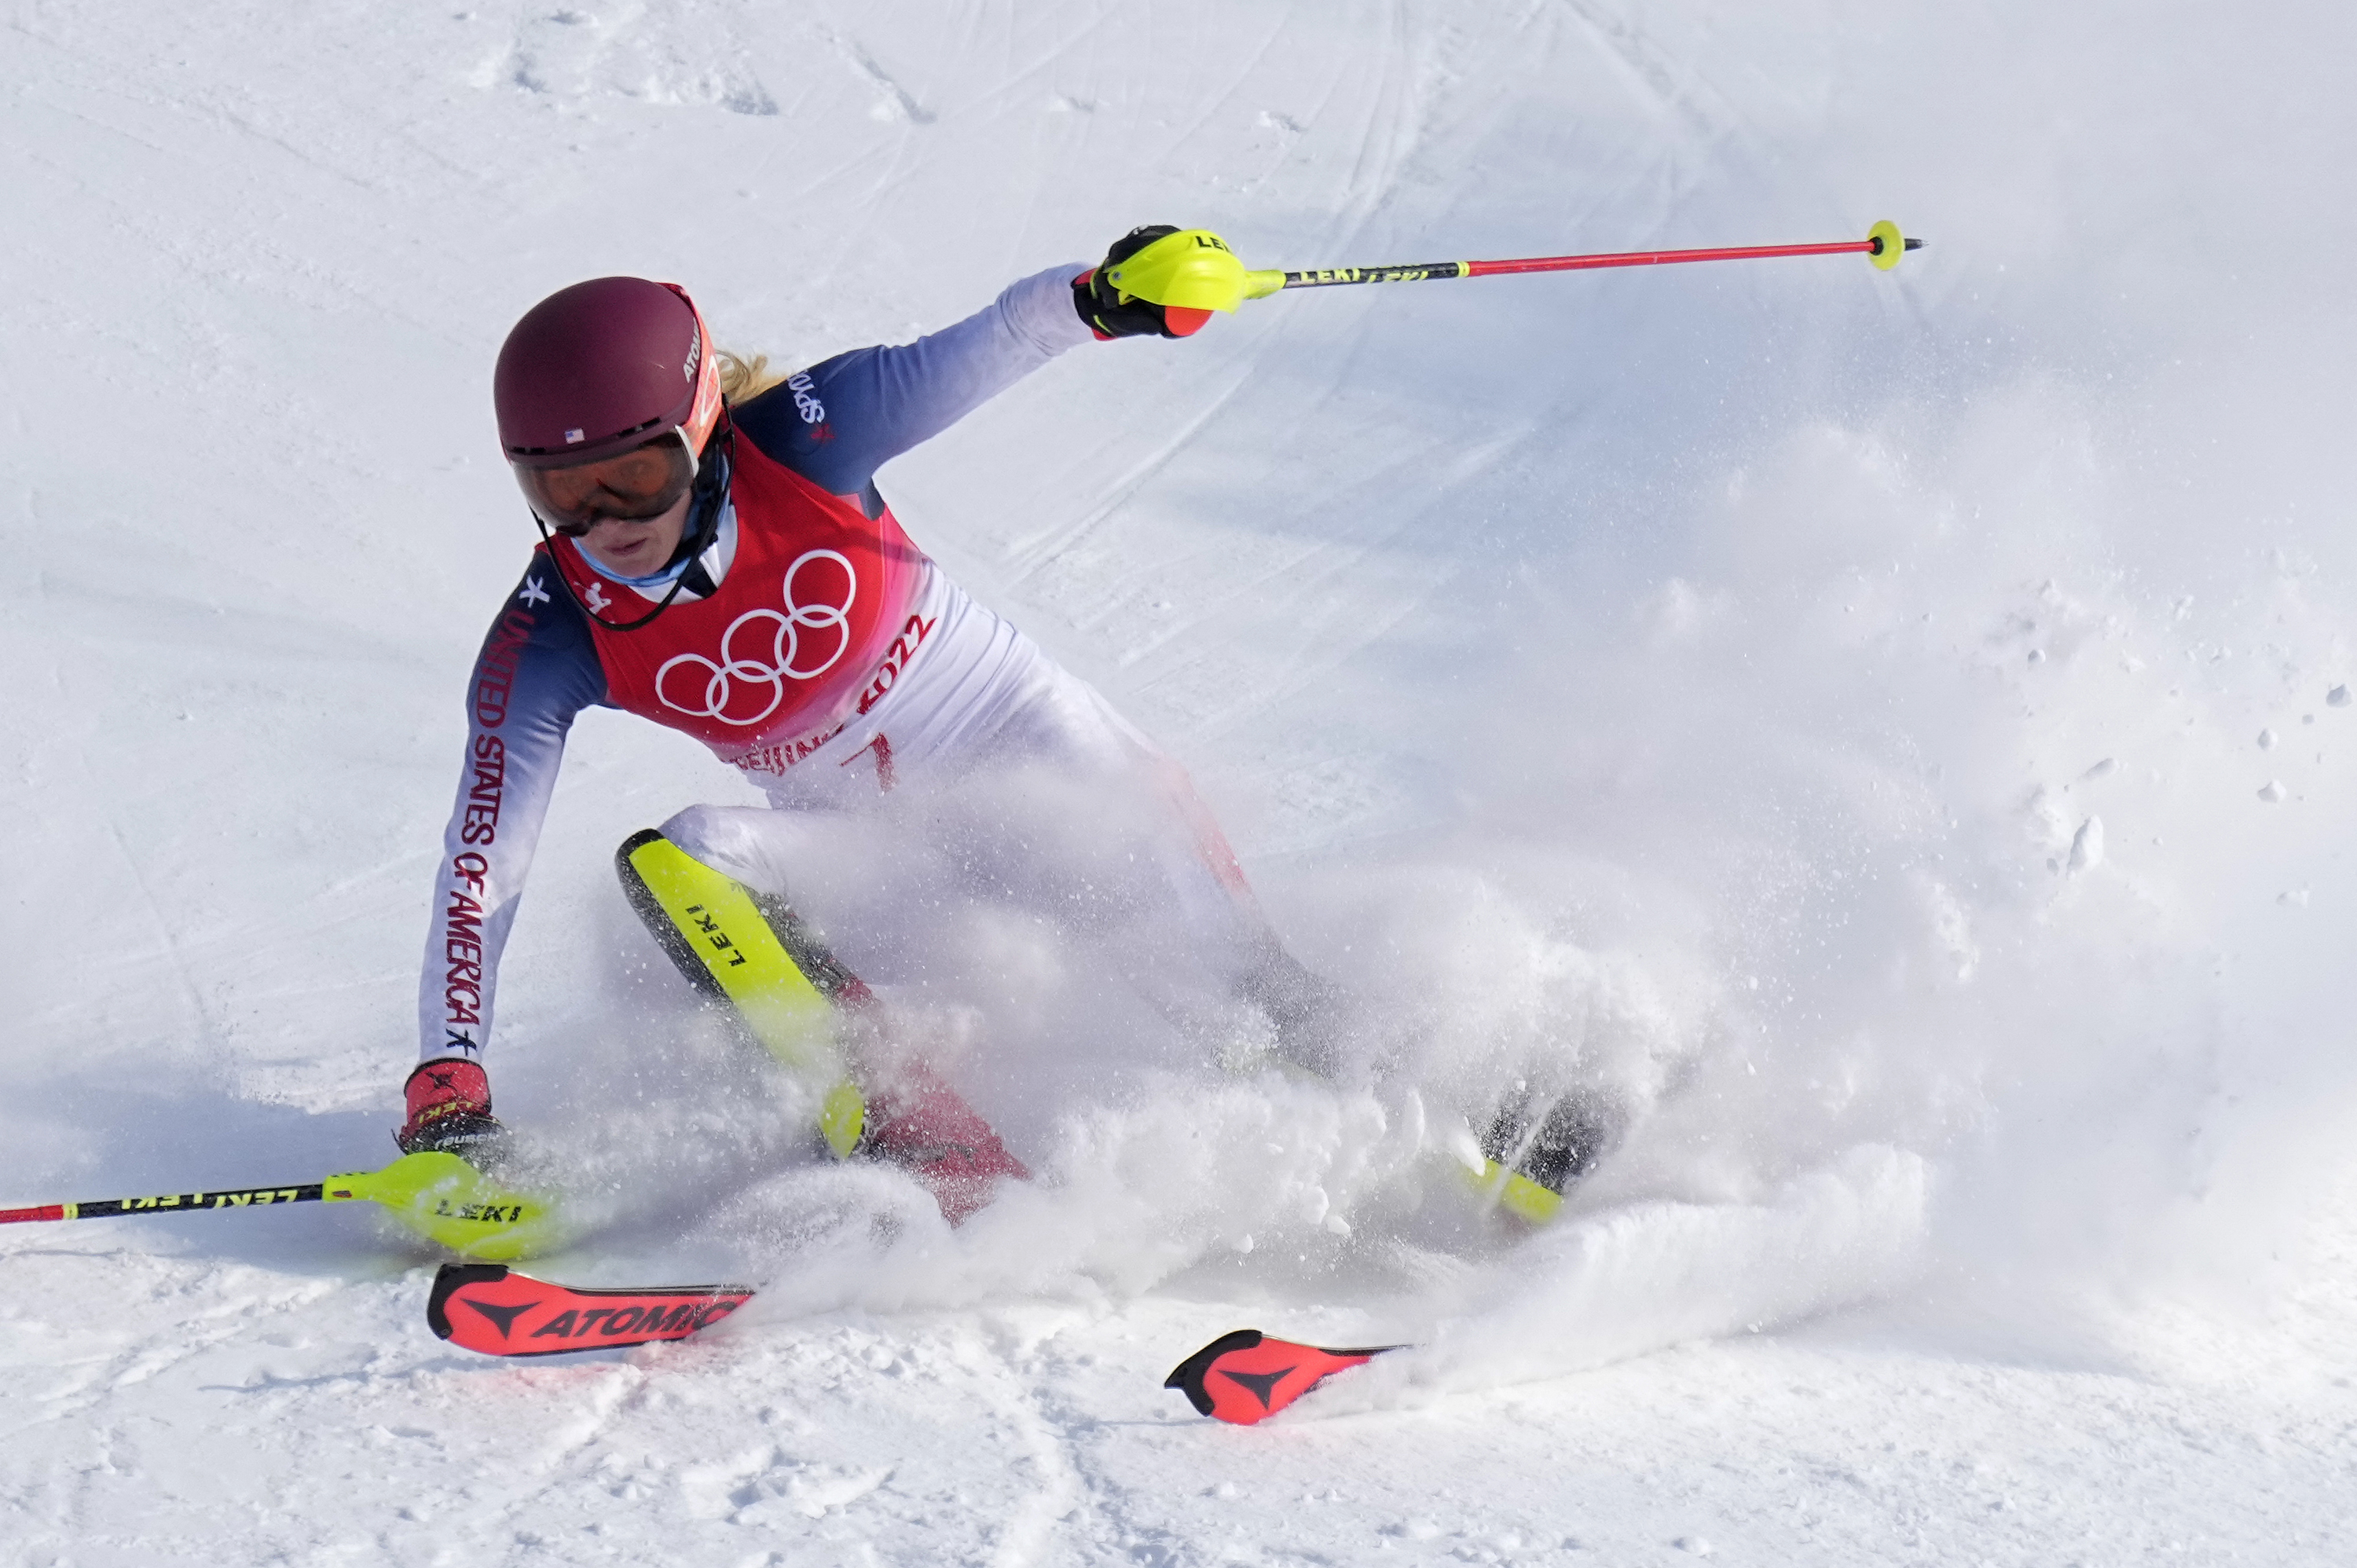 Team USA's Mikaela Shiffrin skis out in the first run of the women's slalom on Wednesday.